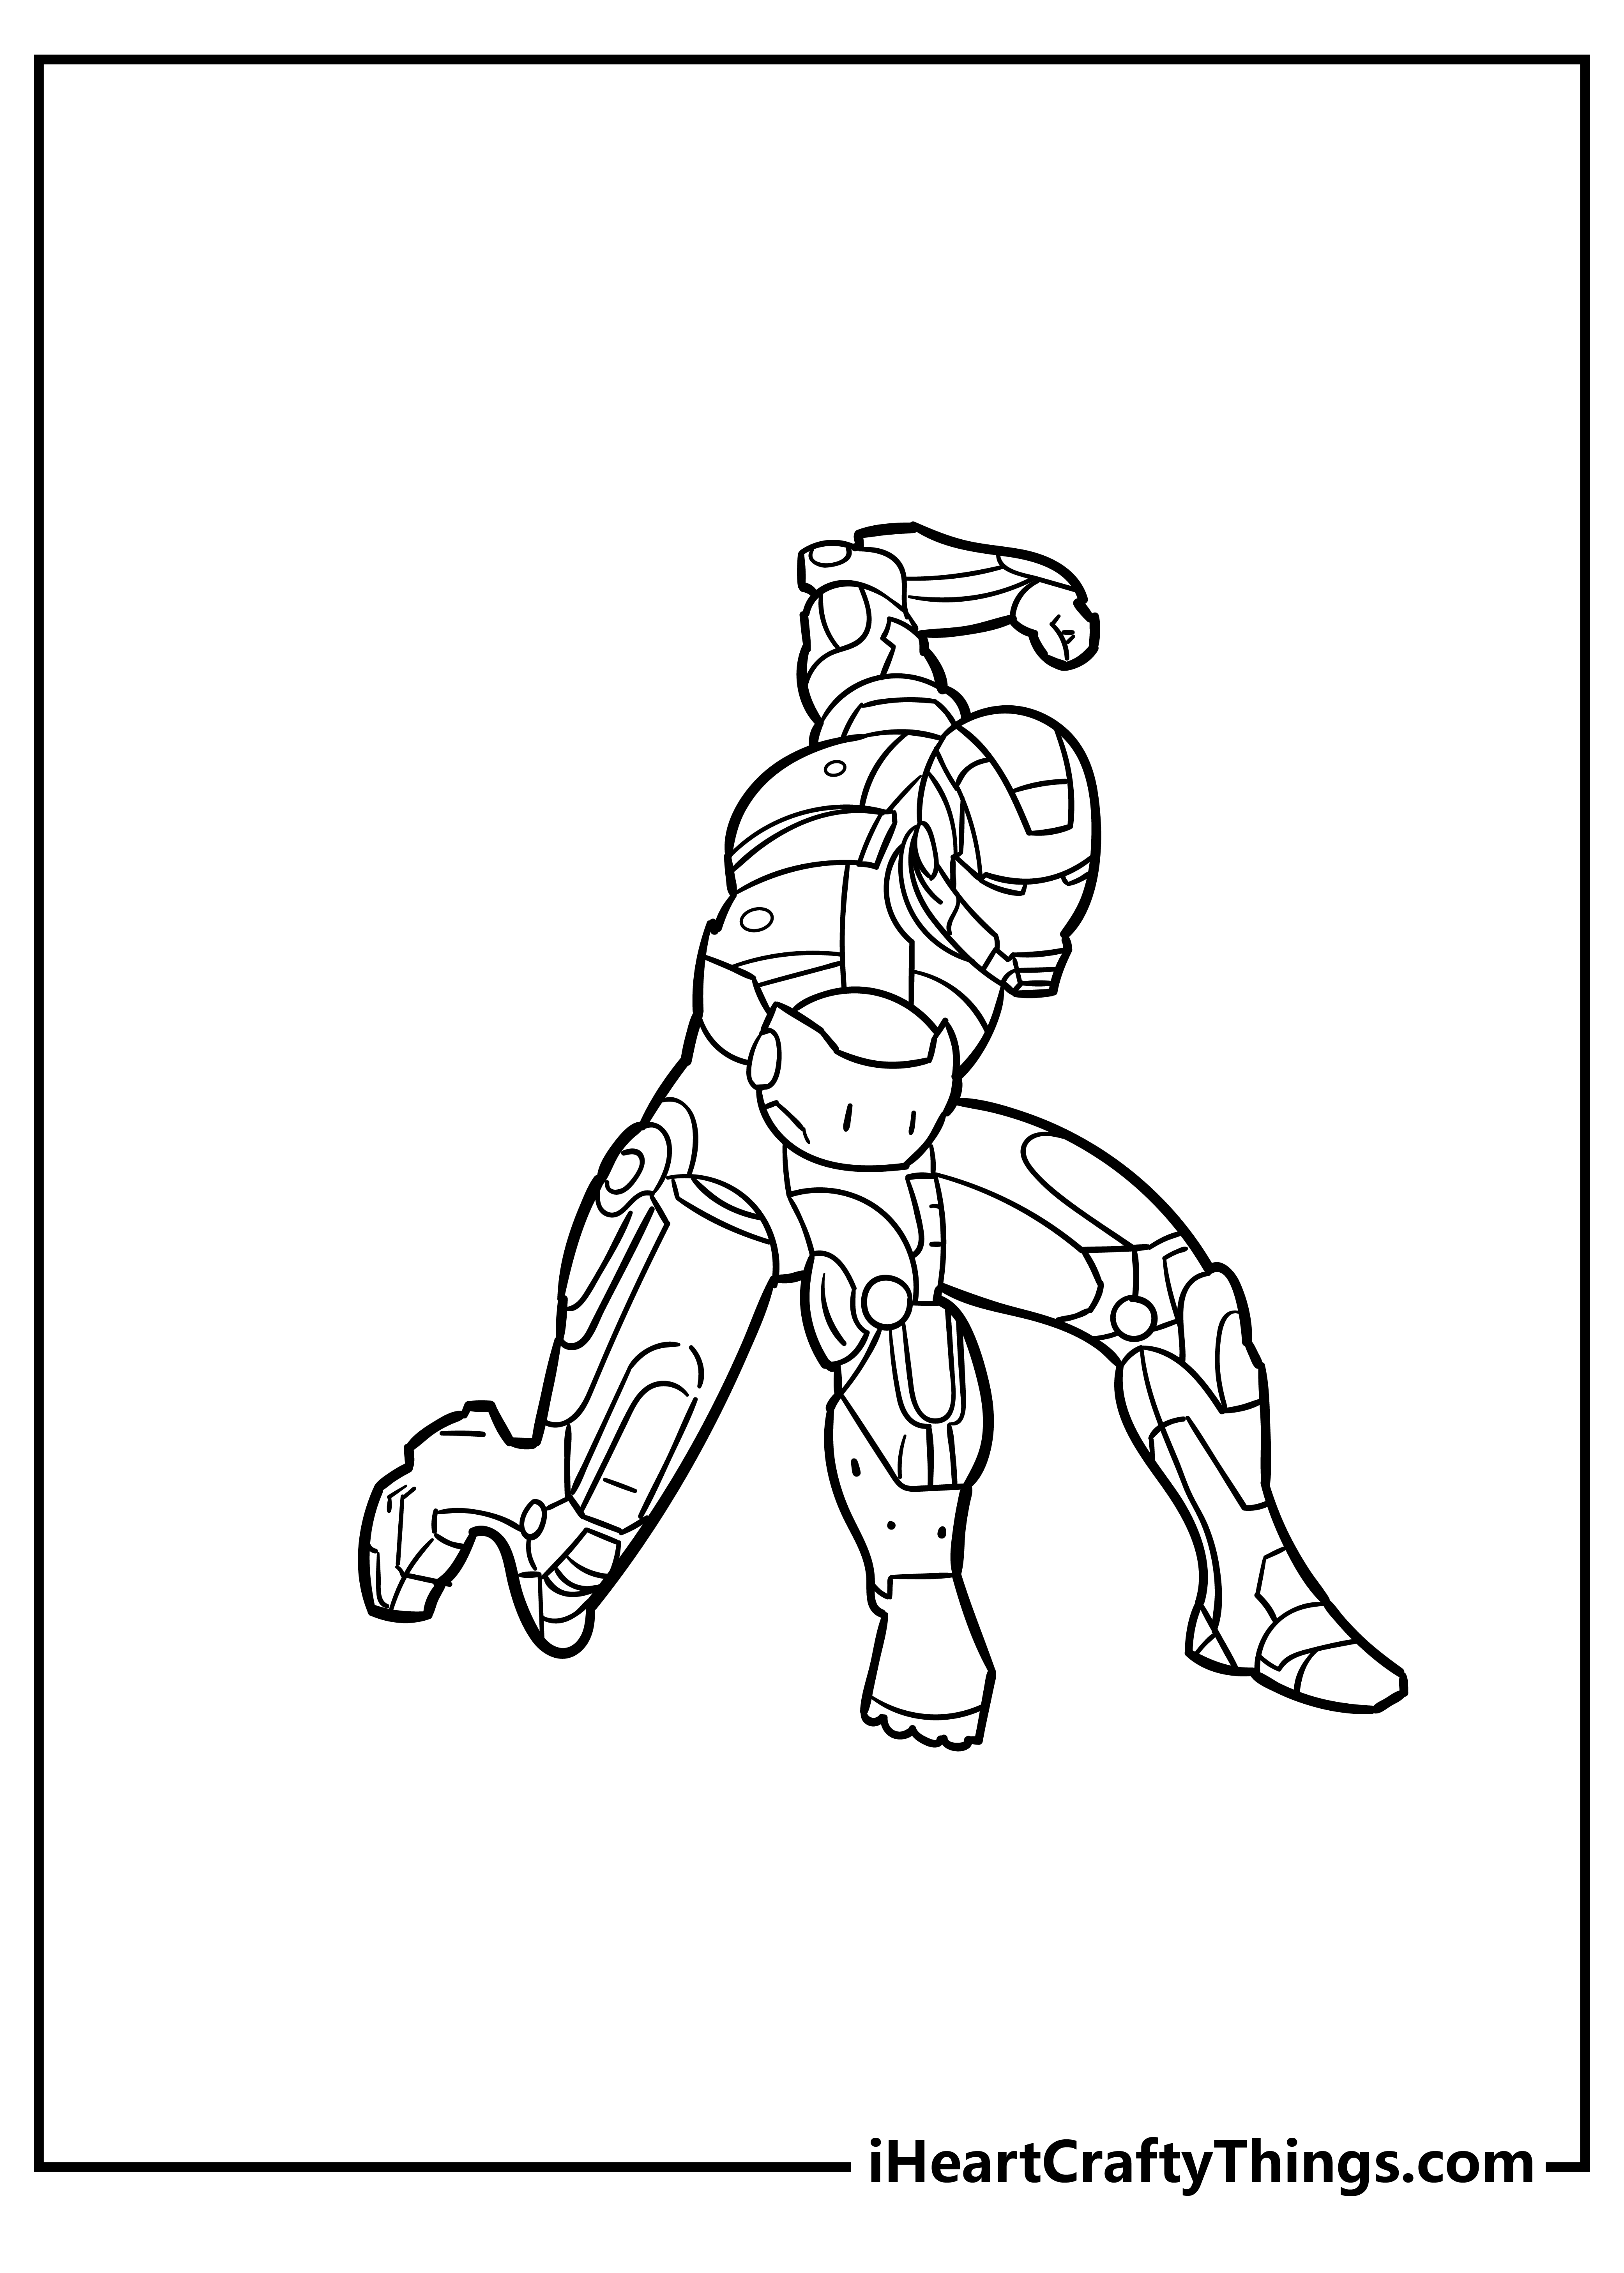 Iron man coloring pages free printables